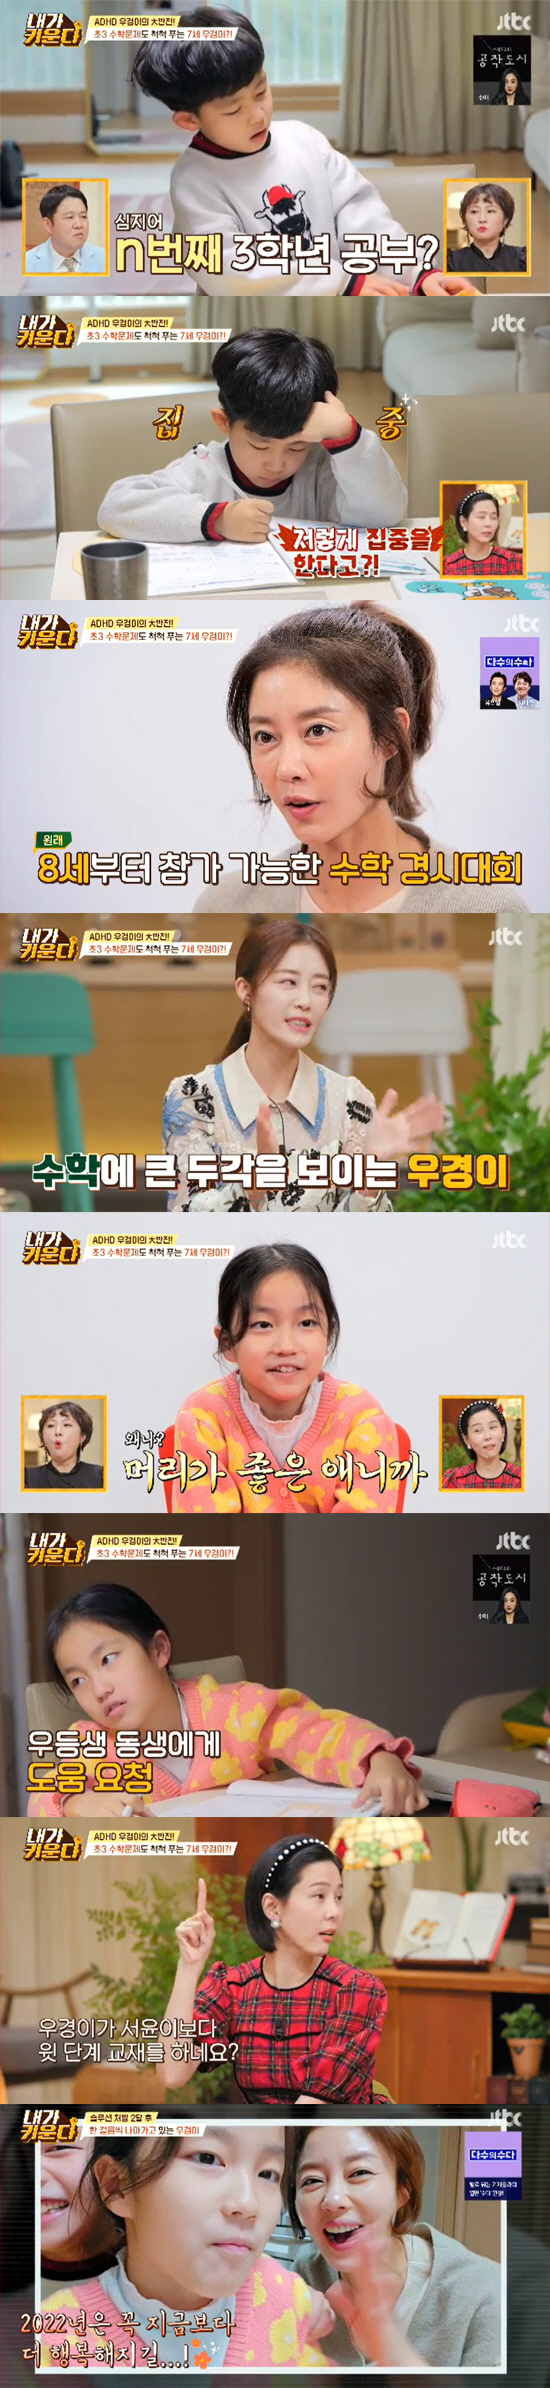 Lee Ji Hyun, a jewelery broadcaster, was the first to reveal the extraordinary talent of ADHD son Woo Kyung Lee, who was always worried.In the JTBC entertainment program Brave Solo Parenting - I Raise, which was broadcast on the 22nd, Lee Ji Hyun, who gave a decisive discipline to the son Woo Kyung after consultation with Dr. No Kyu Sik, was spread.Two people who were playing games and homework.Lee Ji Hyun ate snacks and offered a game for 30 minutes after homework, but Woo Kyung gave up one step at a time, insisting that he had a snack and a game for 30 minutes at the same time.The studio was surprised by the appearance of a third grade Korean language and a math-solving Woo-gum, which is higher than the second grade sister.Lee Ji Hyun said: I dont want to do good.I try not to do it, but I turn to the second grade problem book and solve the third grade problem book many times. My sister Seo Yoon is solving her second grade problem book.Woo Kyung-yi is seven years old and she won the Grand Prize at the math competition with her eight-year-old children. I think you have a way to live.My sister Seo Yoon-yi also said, I thought my brother was the best prize. I have a good head.Chae Rim said, Woo Kyung-i should change his perspective. Do not think of him as a problem child and think of him as a special child.The Korean language book that solves is also the third grade. The 7-year-old child solves a rather long sentence.Lee Ji Hyun made his sisters favorite Tanghur with children and healed by taking ASMR videos.I will be a ninja and destroy the world. Lee Ji Hyun said, I hope you will eat a lot of rice next year in 2022 and we will be happy.Get a lot of New Years clothes, he said.Kim Na-young came to the campsite to teach the big son Shin-Urayasu Station his own bicycle.Kim Na-young, who mastered the bicycle in 30 minutes, told Shin-Urayasu Station, Bicycle is learning by falling down.Kim Na-young tells Shin-Urayasu Station, You have to look ahead.Go to the center, Shin-Urayasu Station said. The handle is just taken off. Mom should take the handle. I want to go to the center.Its hard to go to the middle, but my mother keeps telling me to go to the middle. Kim Na-young said, Shin-Urayasu Station was annoying to me.I almost fought, he laughed.